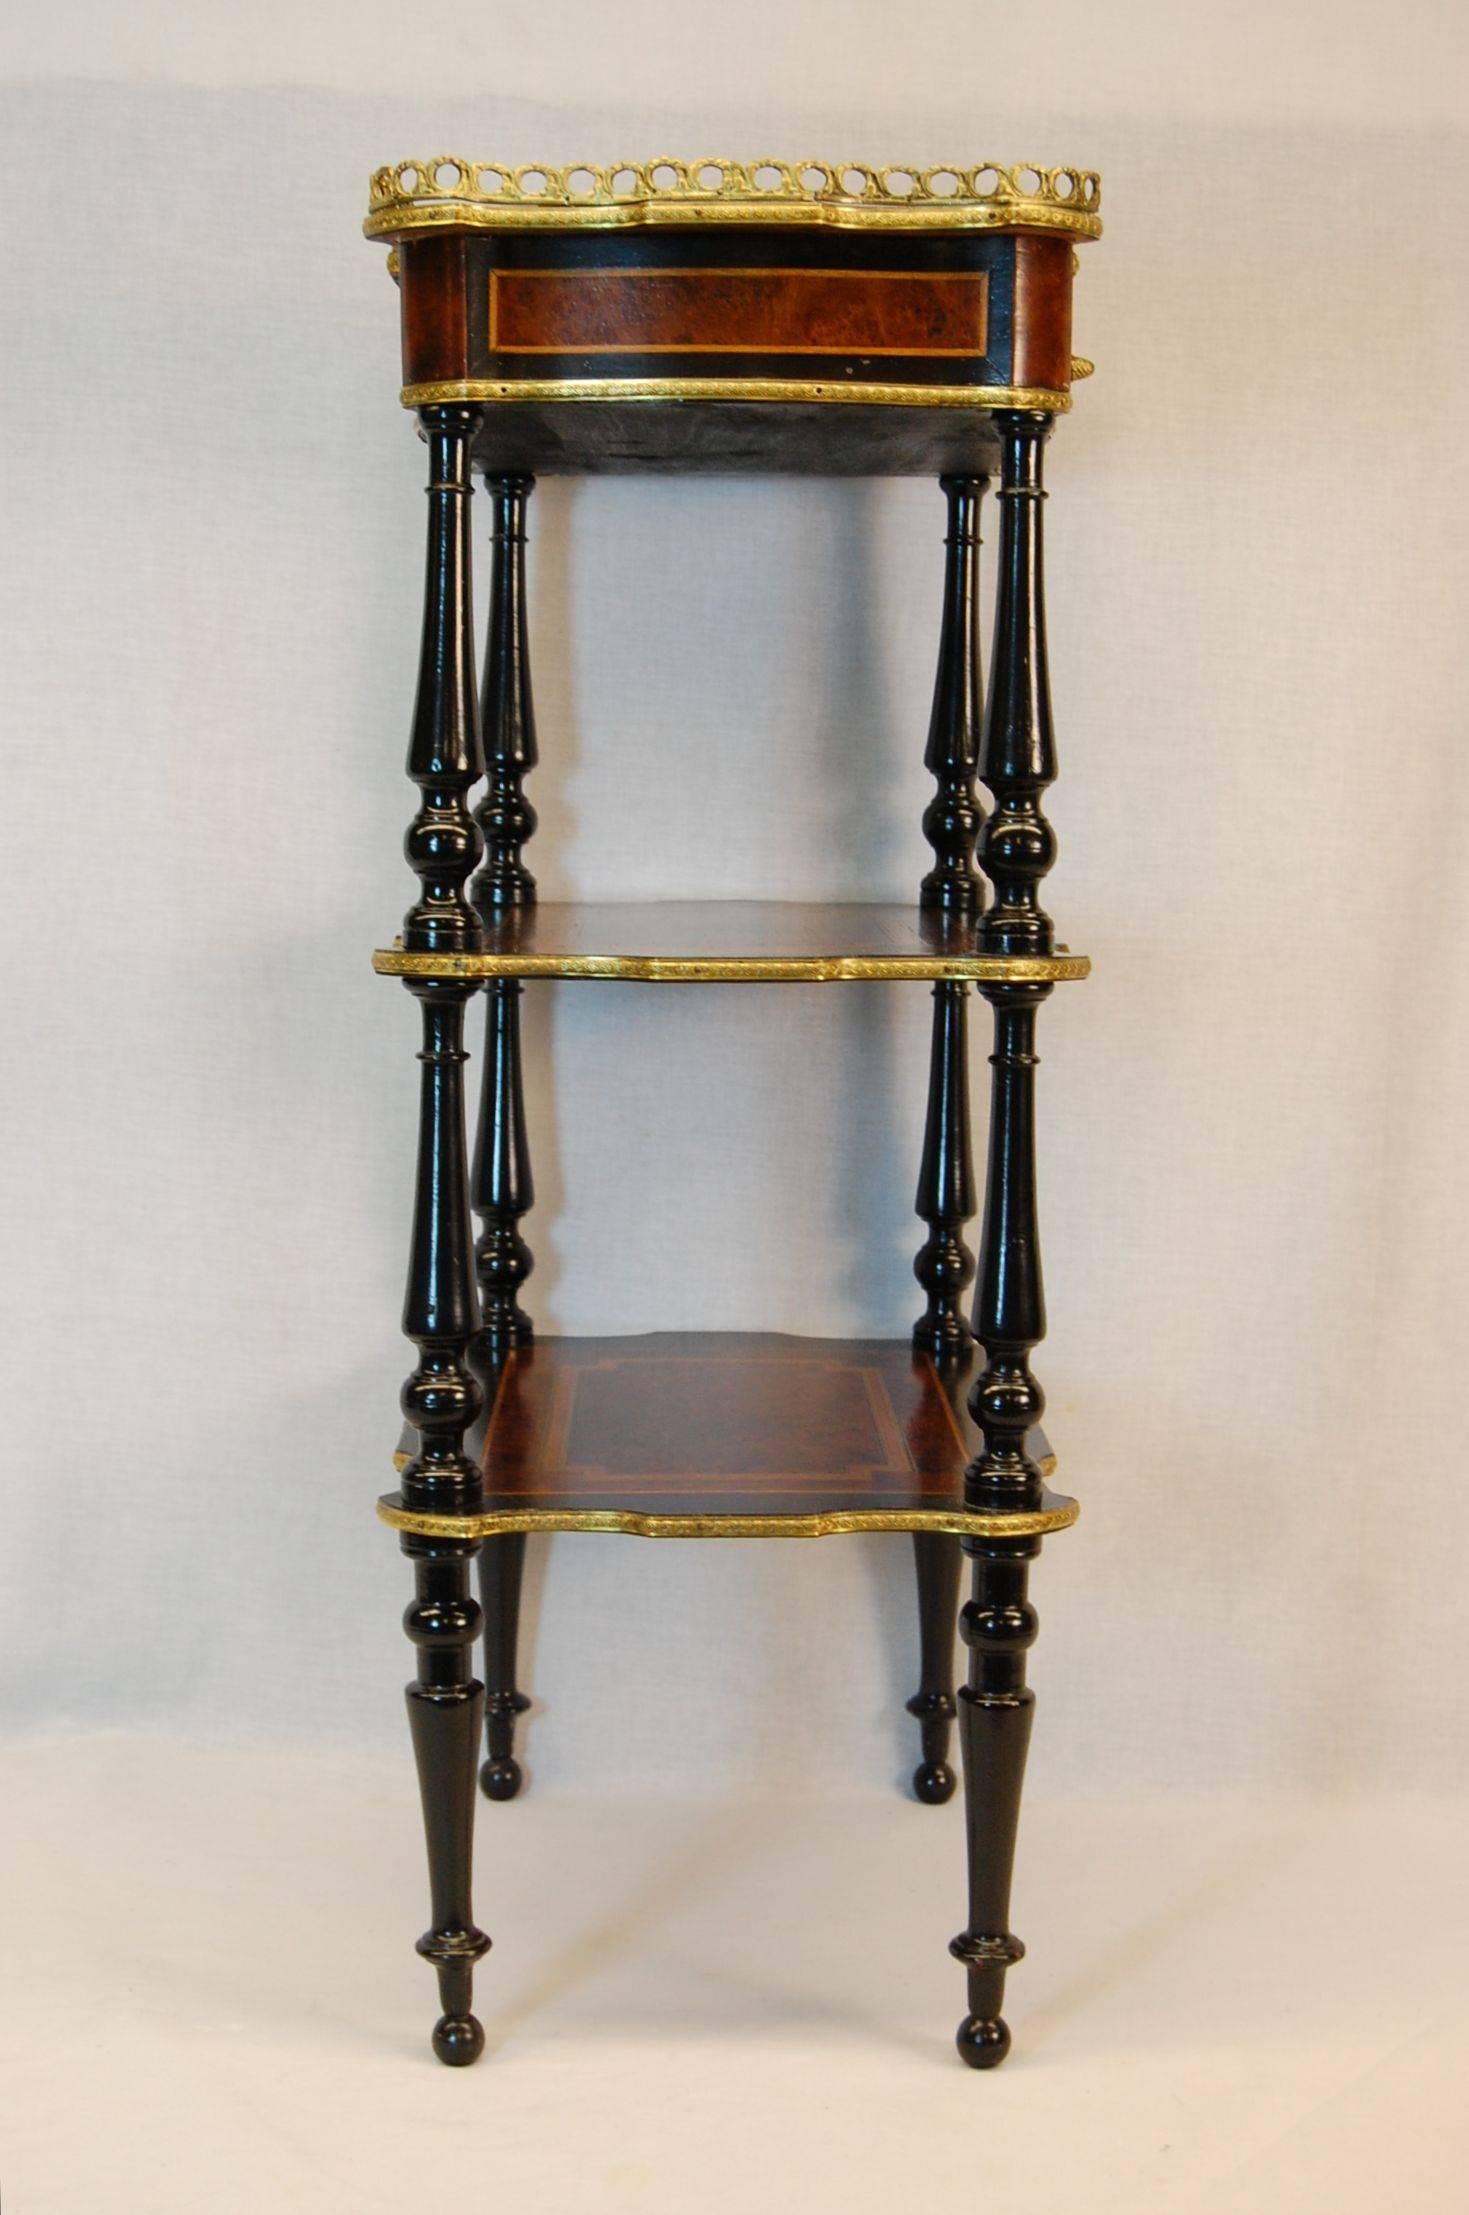 French Neoclassical Revival Three-Tier Side Table, circa 1870 In Excellent Condition For Sale In Pittsburgh, PA